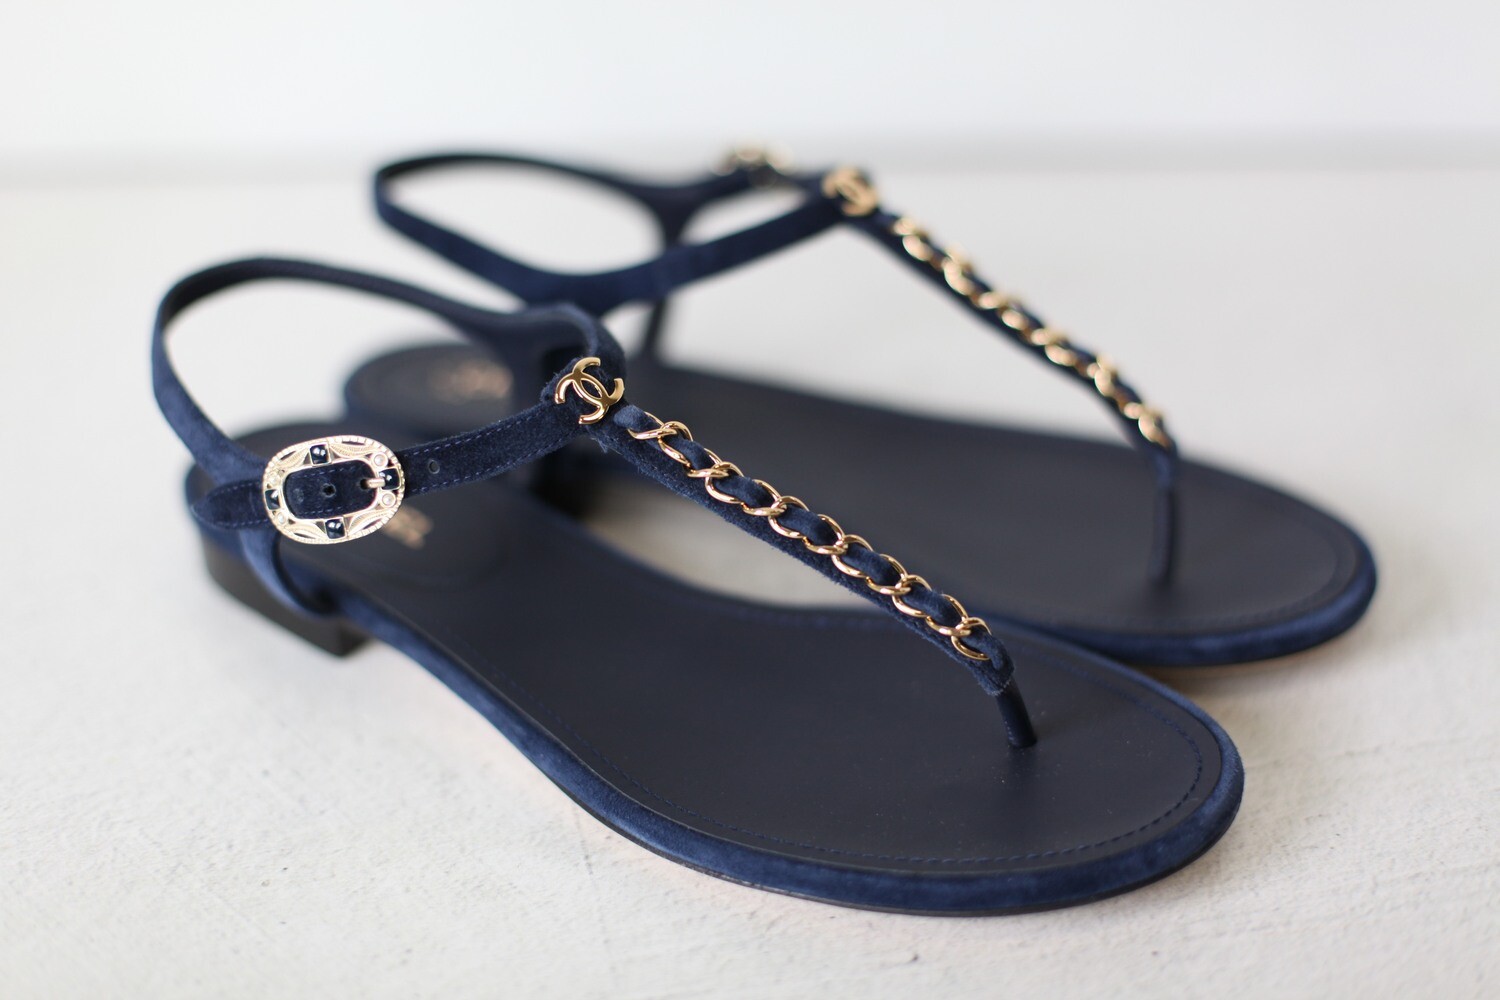 Chanel Jeweled CC Thong Sandals 37 EU – Madison Avenue Couture